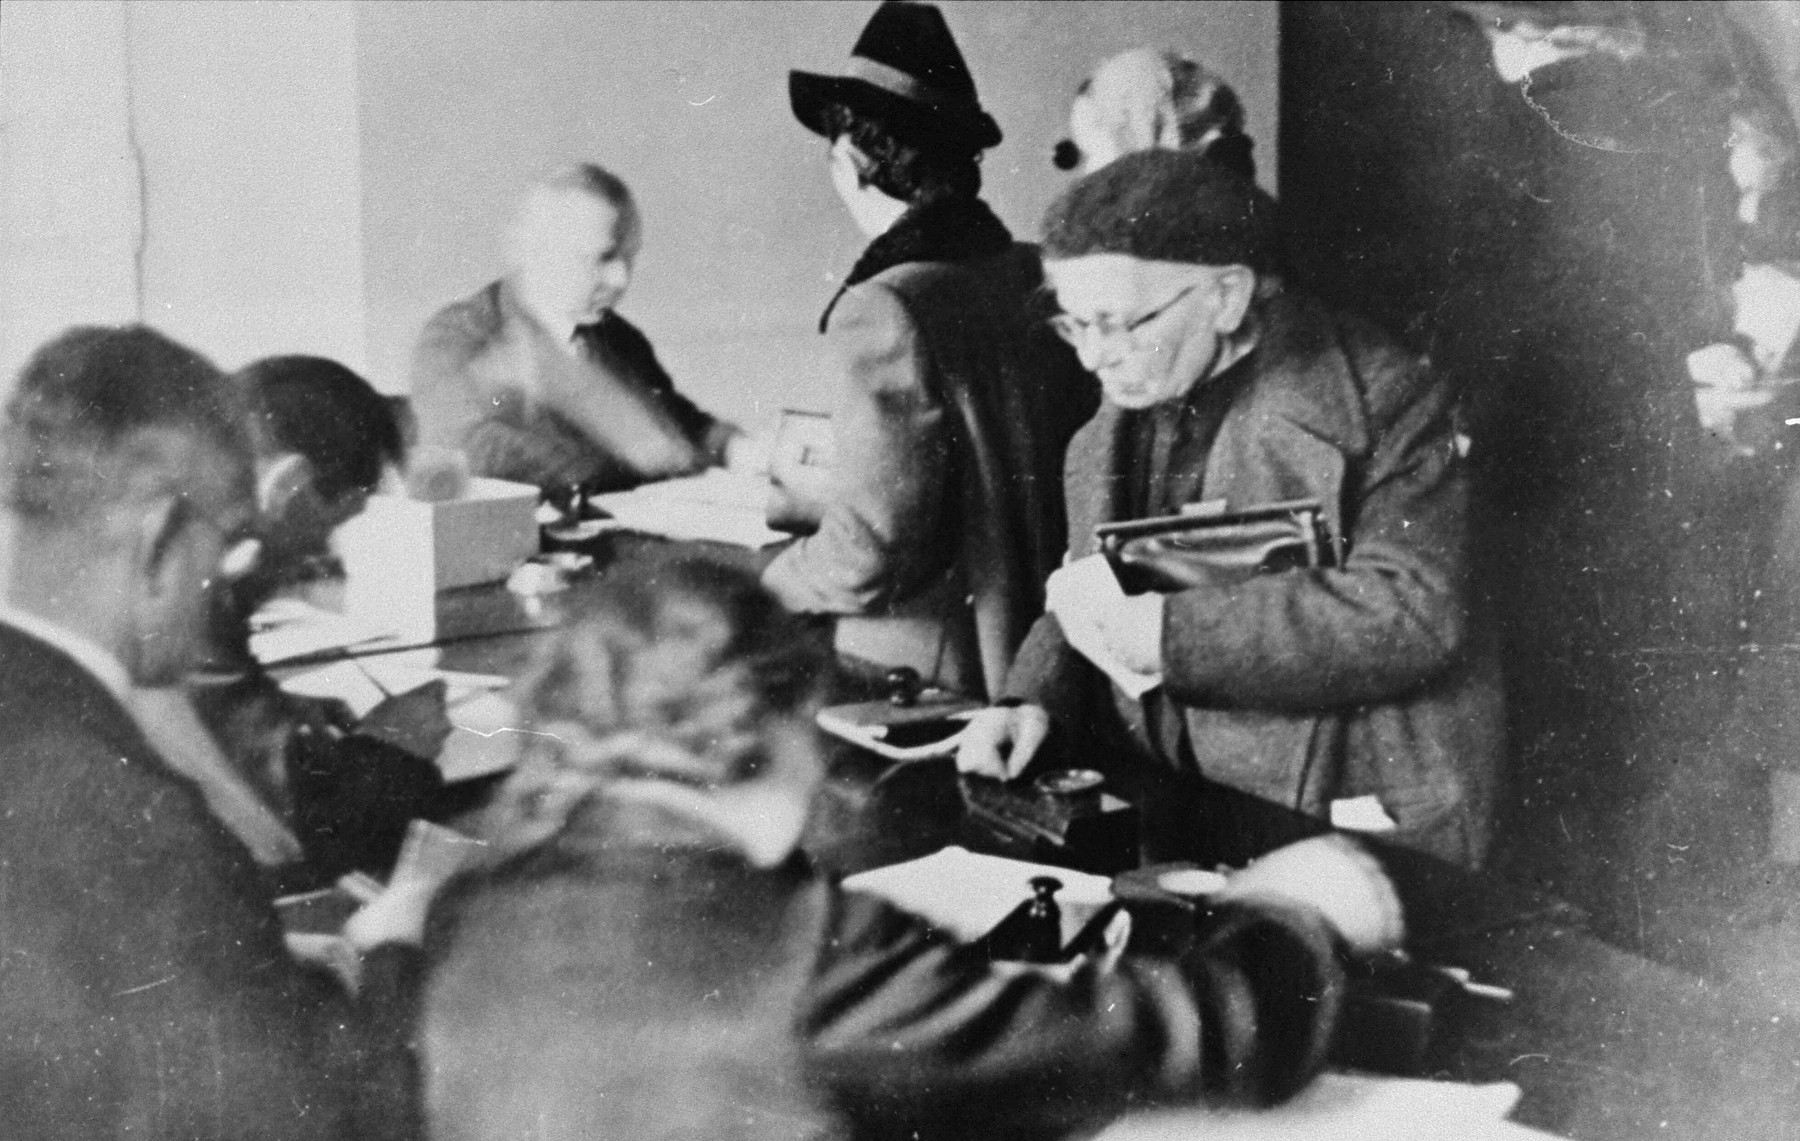 Jews register for identification papers and work permits in the offices of the Jewish Council in the Krakow ghetto.